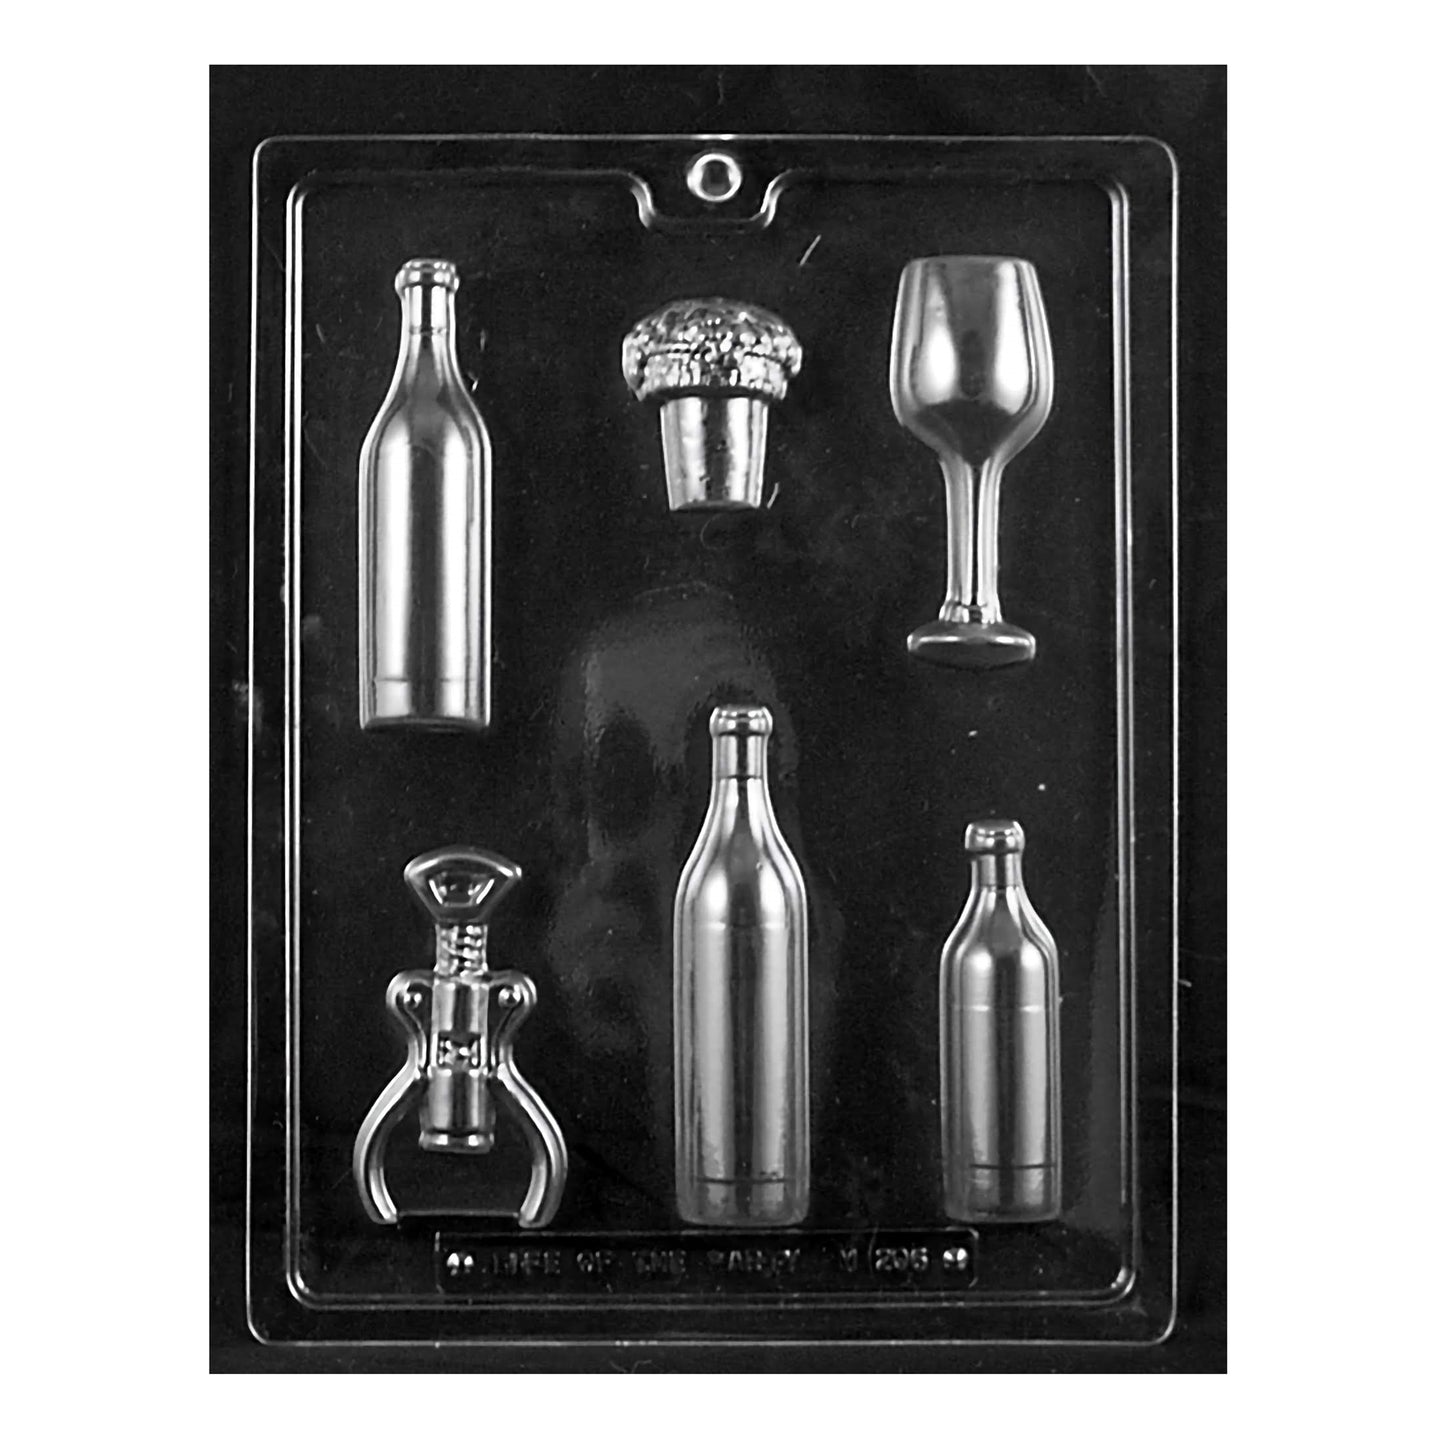 This is a specialized chocolate mold for wine enthusiasts, featuring cavities shaped like bottles, corkscrews, wine glasses, and a wine bottle cork. The mold is designed to create detailed chocolate replicas of these items, ideal for gifts or wine-tasting events.